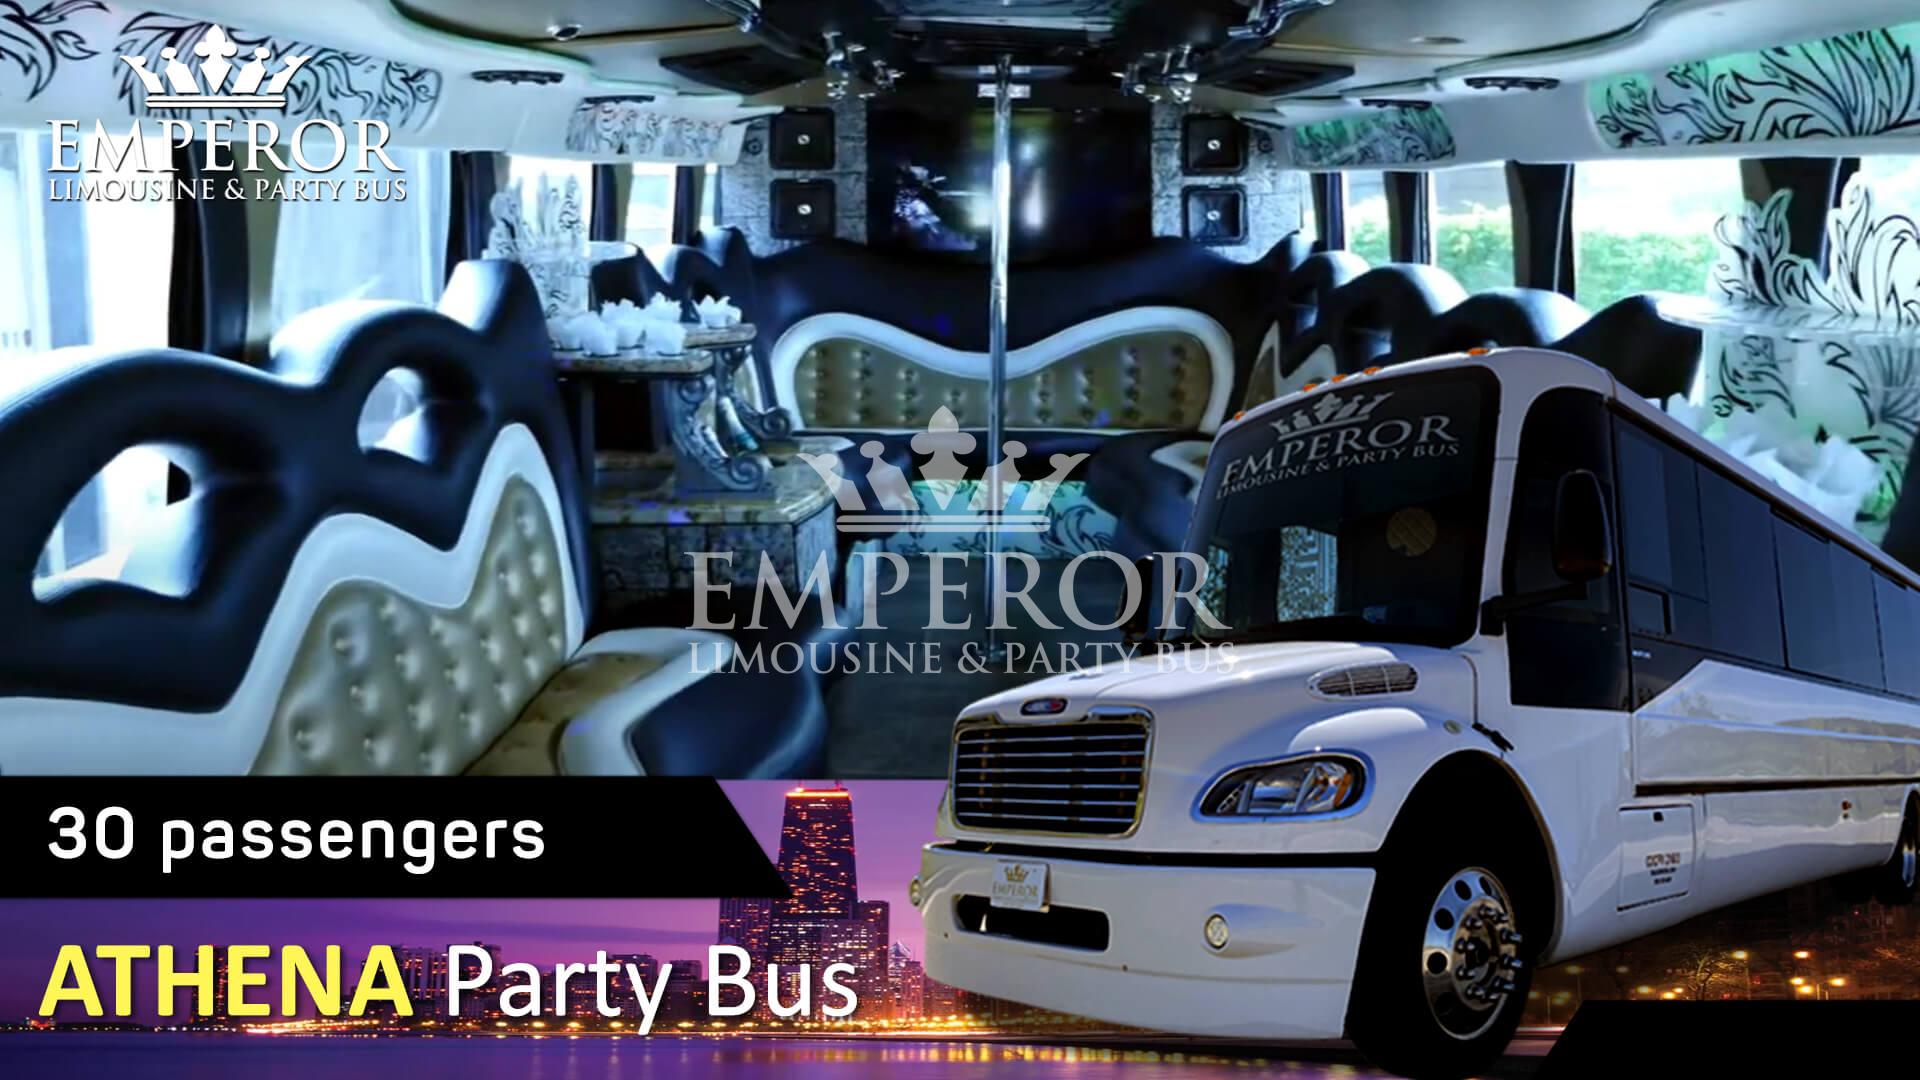 Party bus rental service in Blue Island - Athena Edition